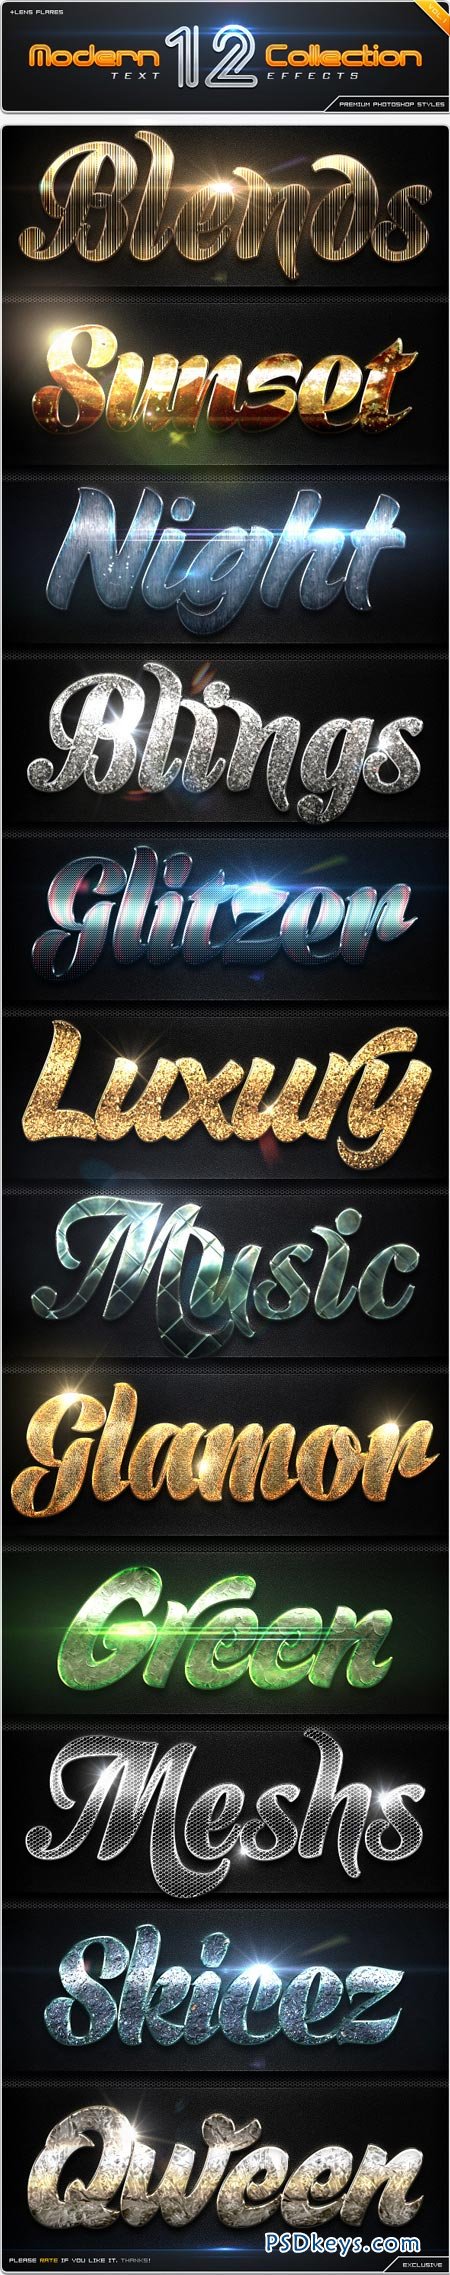 12 Modern Collection Text Effect Styles Vol.1 8796564